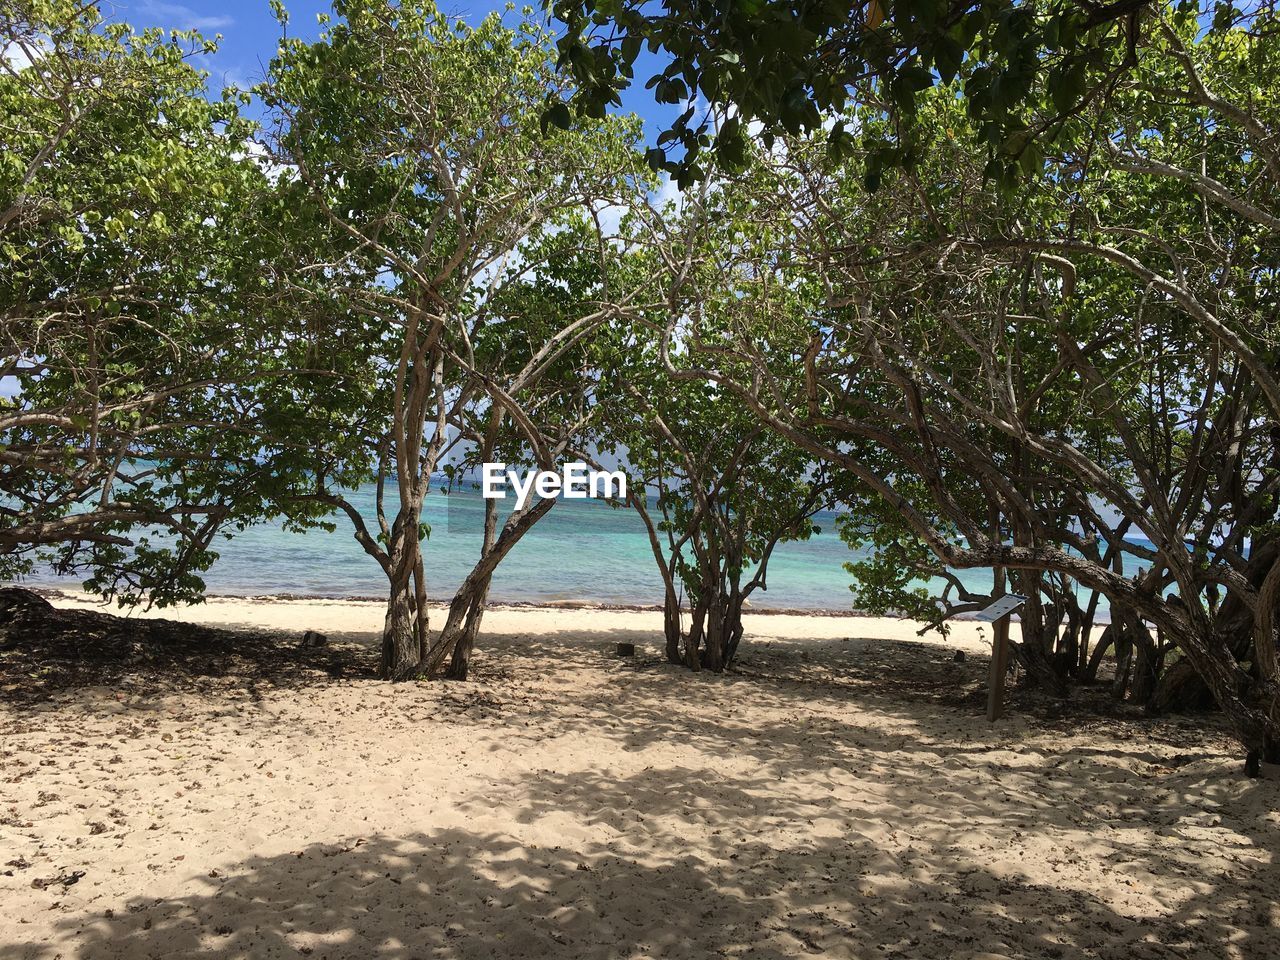 VIEW OF TREES ON BEACH